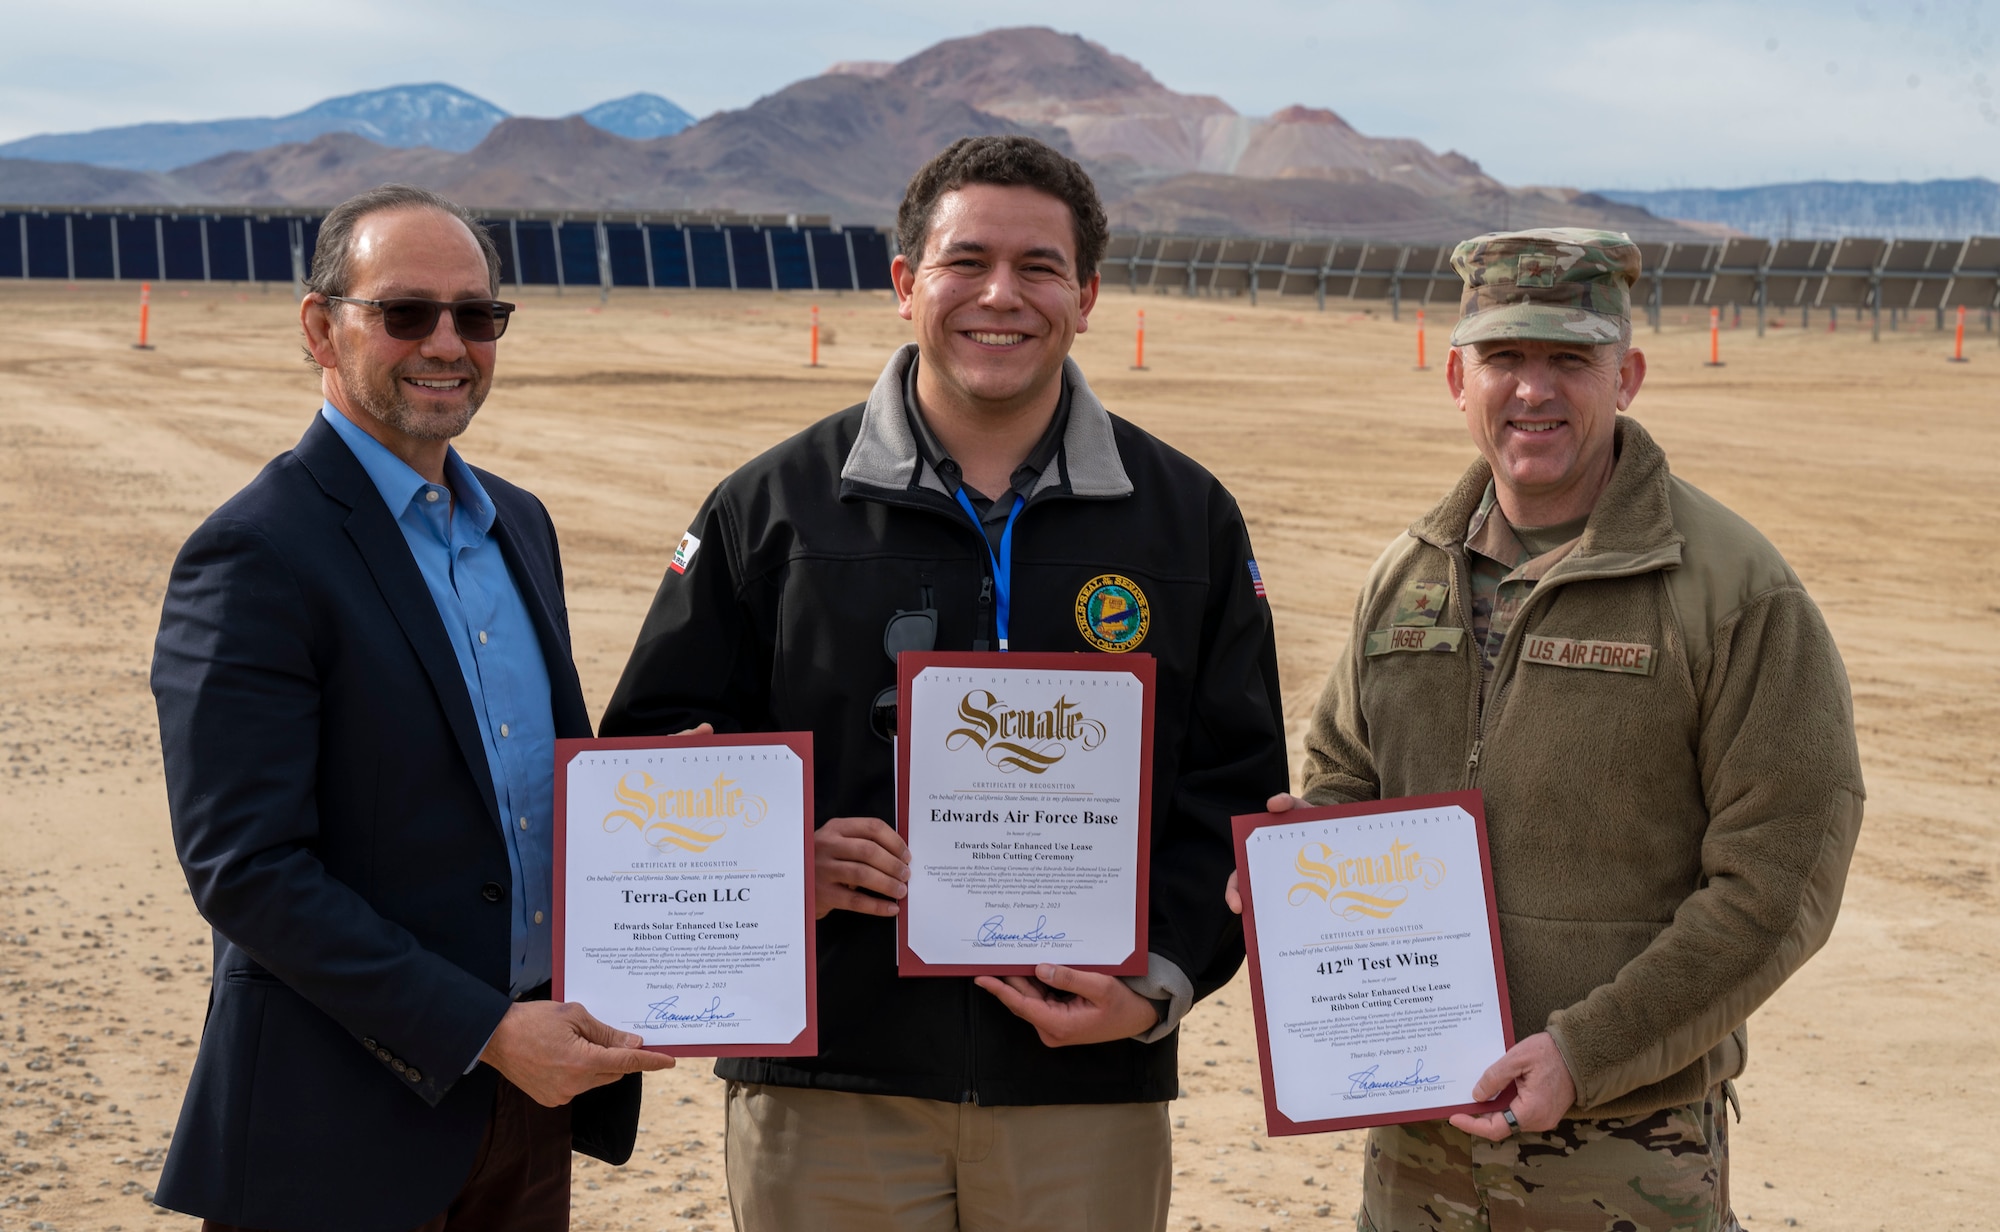 James R. Pagano, Chief Executive Officer, Terra-Gen LLC, and Brig. Gen. Matthew Higer, Commander, 412th Test Wing receive Certificates of Recognition from the California State Senate commemorating the largest private-public collaboration in Department of Defense history at Edwards Air Force Base, California, Feb. 2.